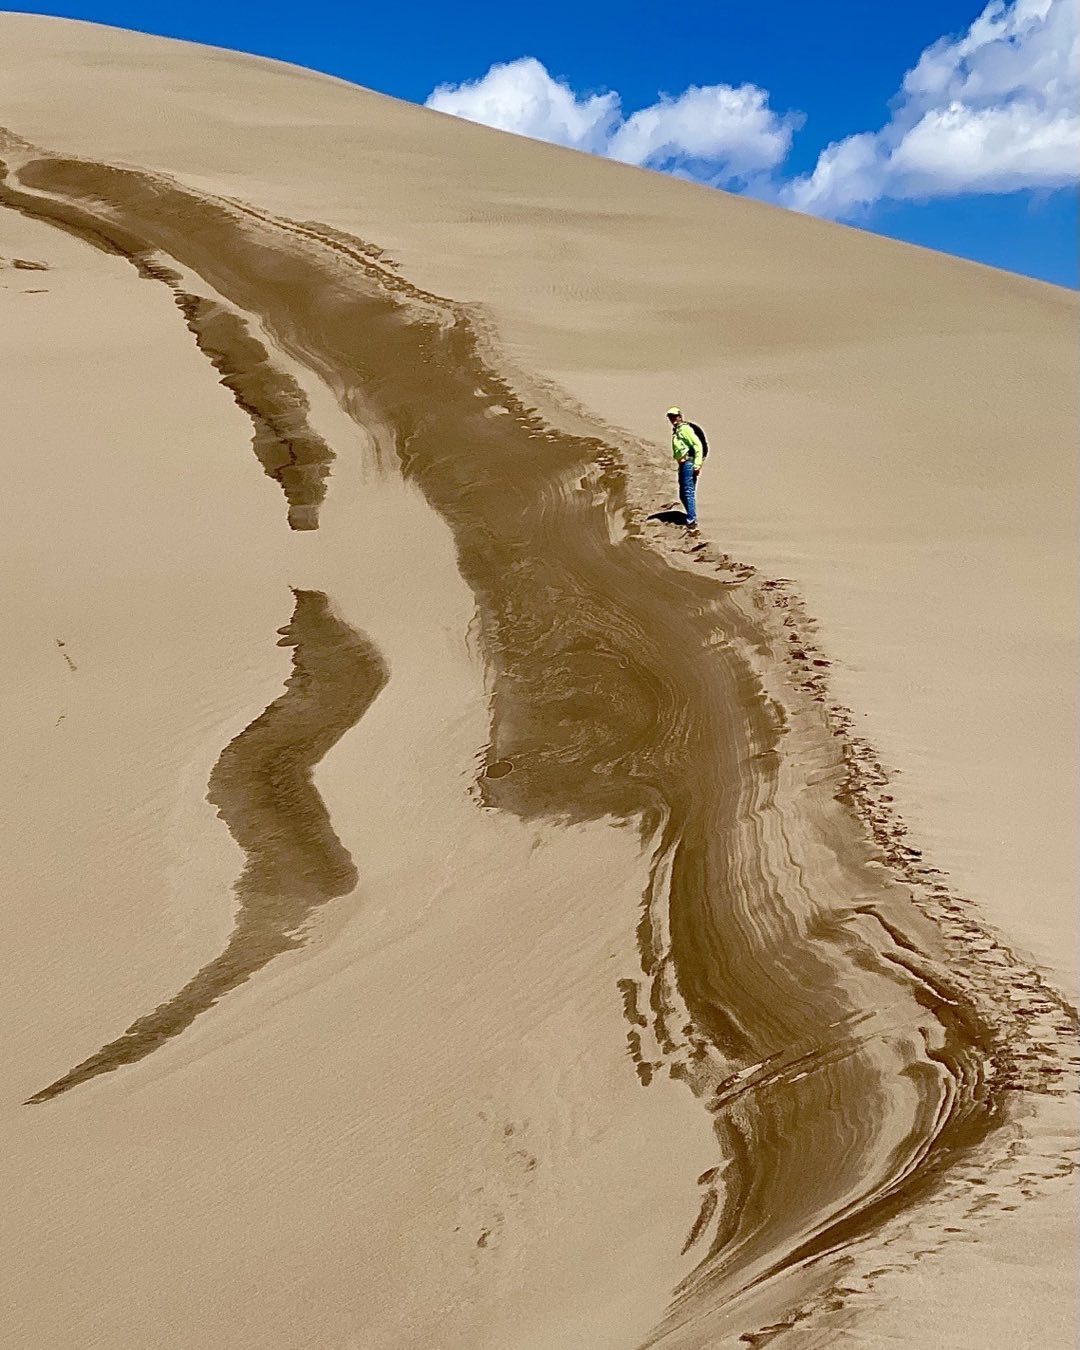 Cindy Orcutt making her way up the last ridge to one of the highest dunes in Sand Dunes National Park today. The scale of this extraordinary landscape is overwhelming. Great place for photography. #greatsanddunesnationalpark #orcuttphotography.com #climbingthedunes